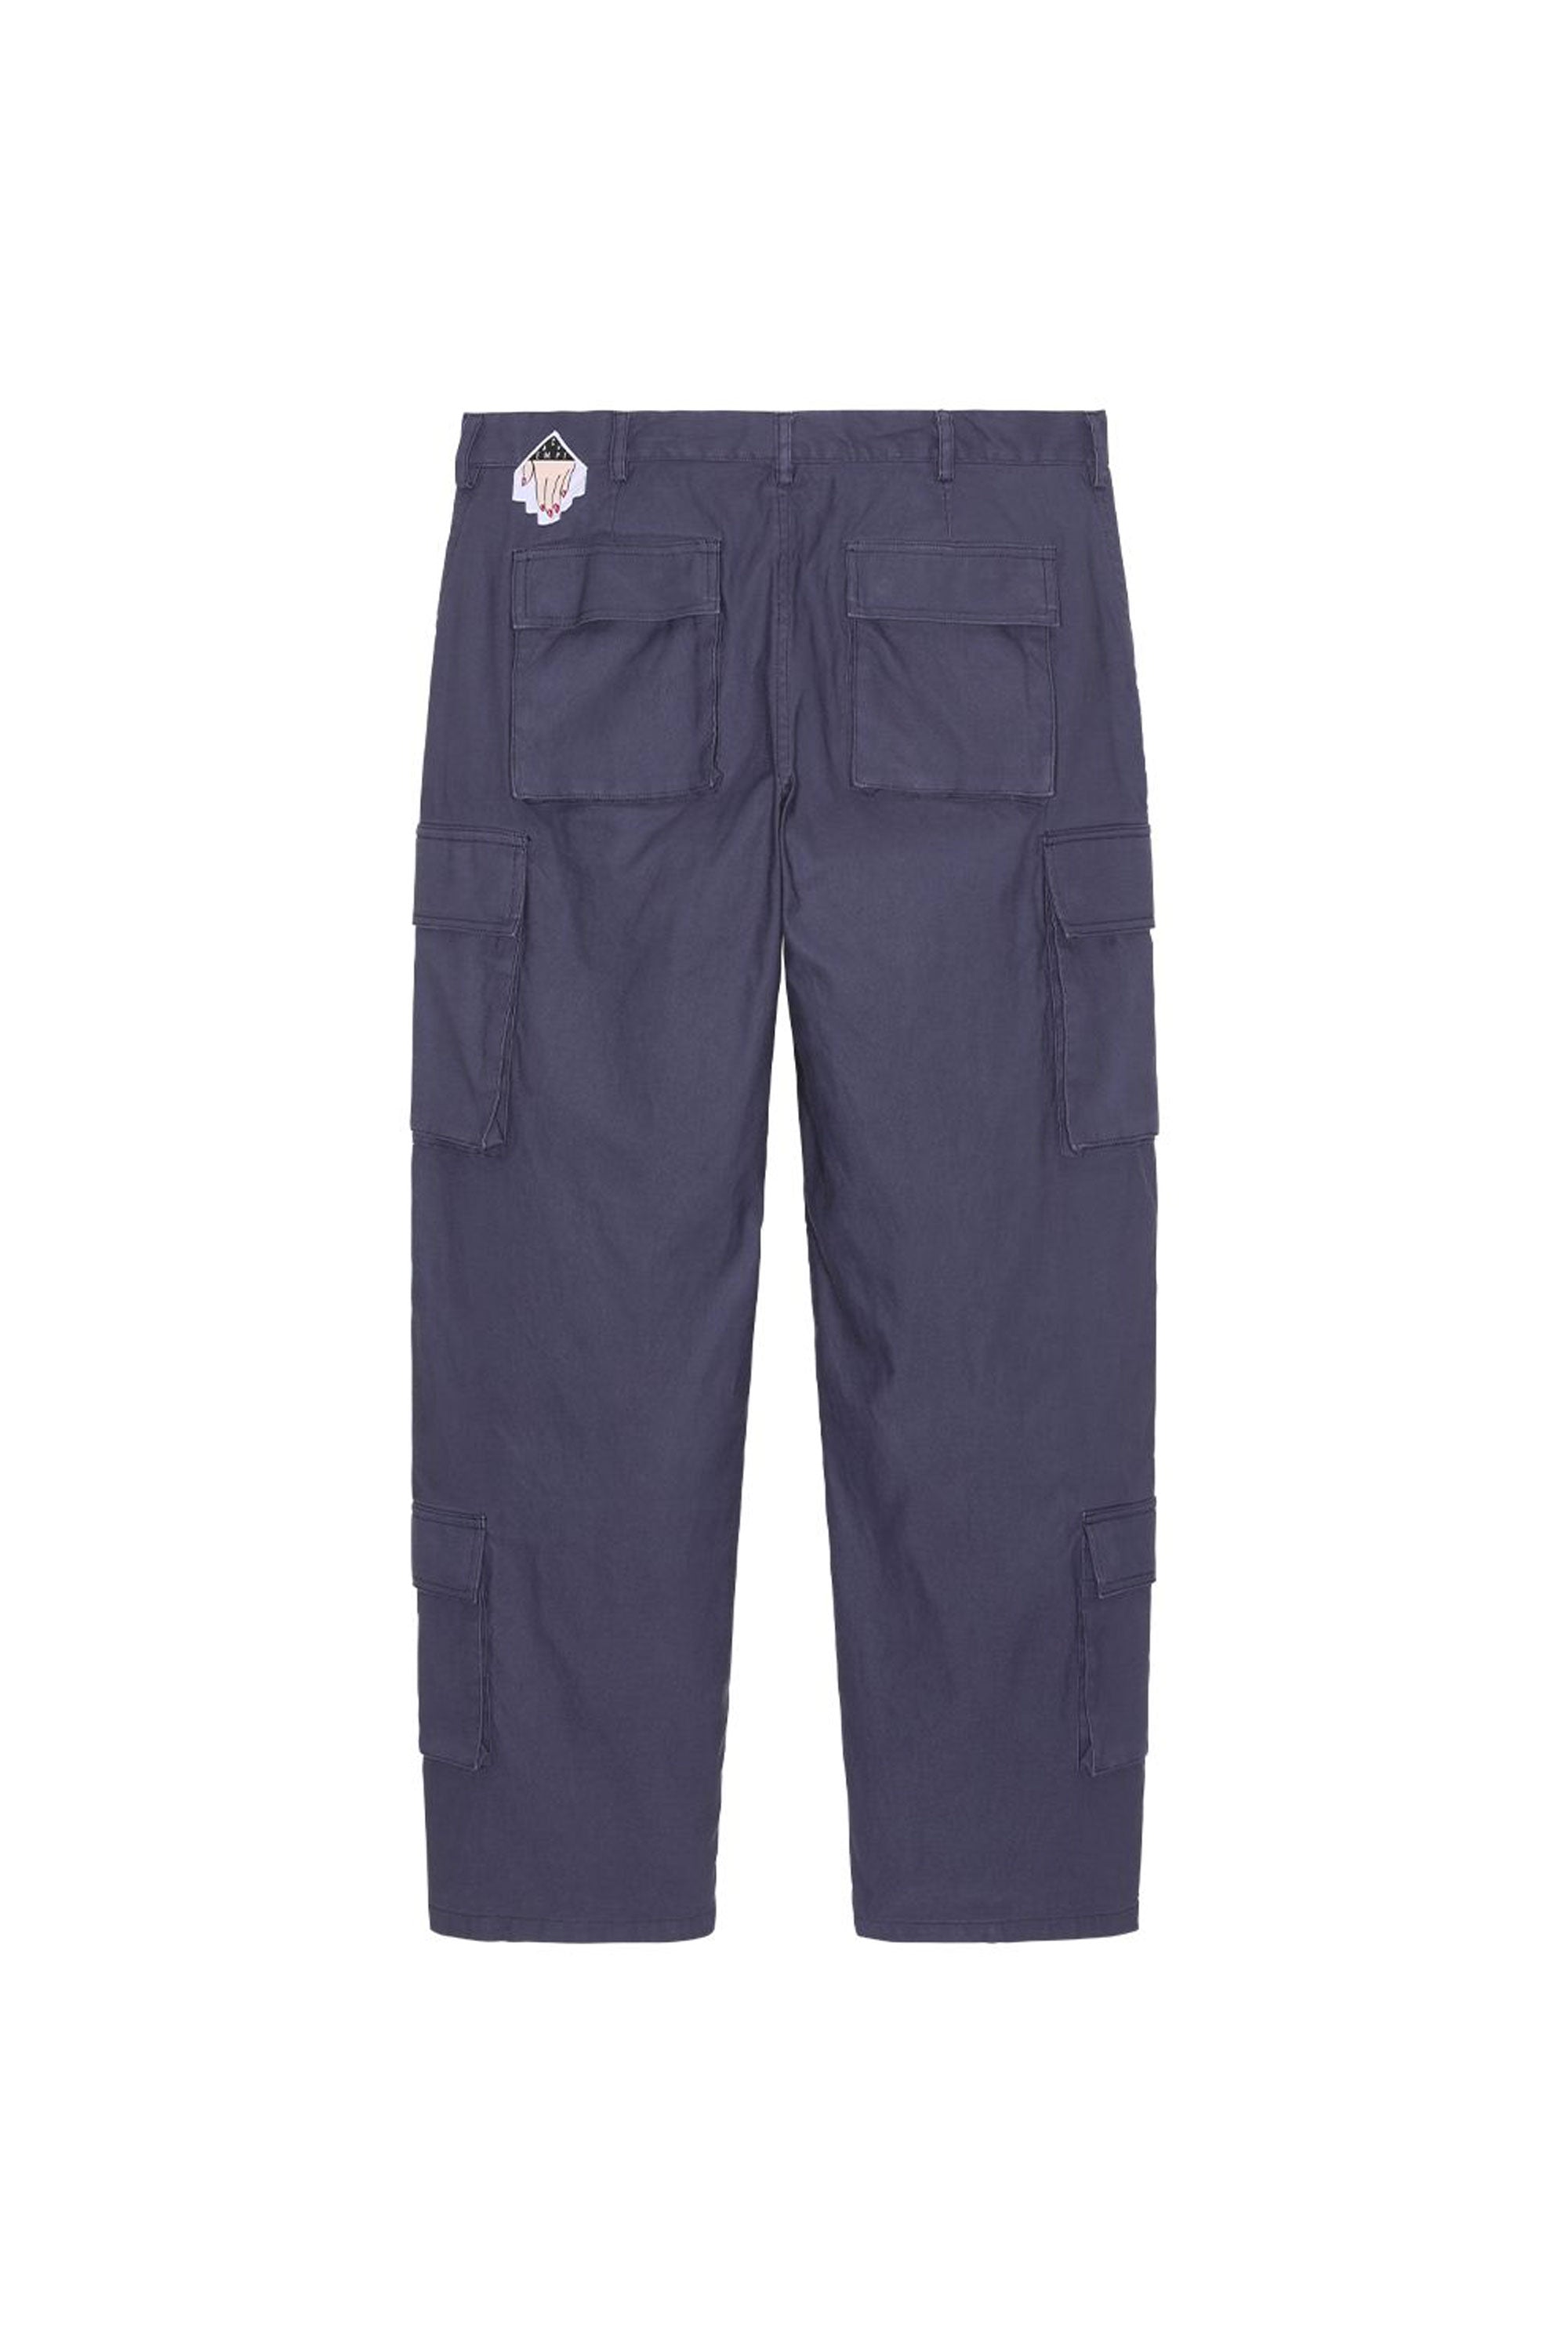 The CAV EMPT - FOUR CARGO POCKET PANTS  available online with global shipping, and in PAM Stores Melbourne and Sydney.